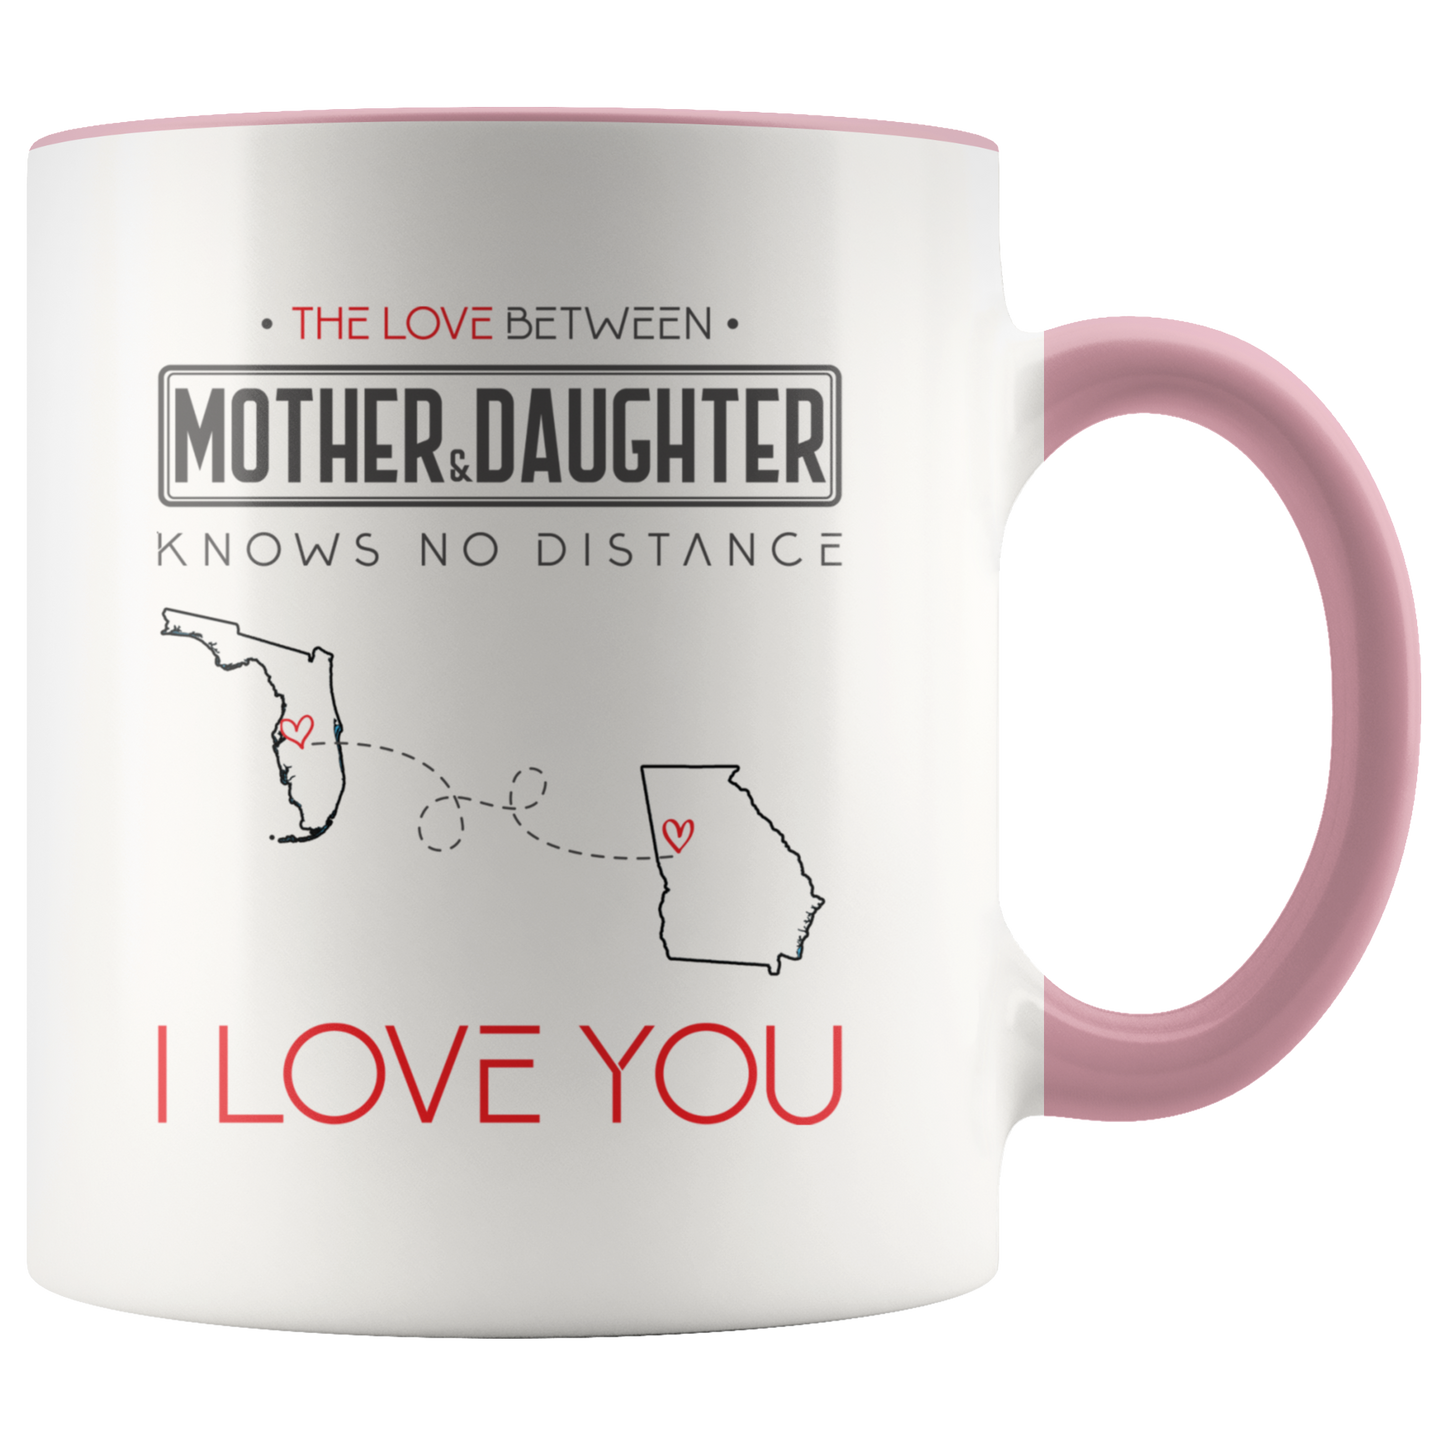 ND-21314071-sp-24139 - [ Florida | Georgia ]Mom And Daughter Accent Mug 11 oz Red - The Love Between Mot